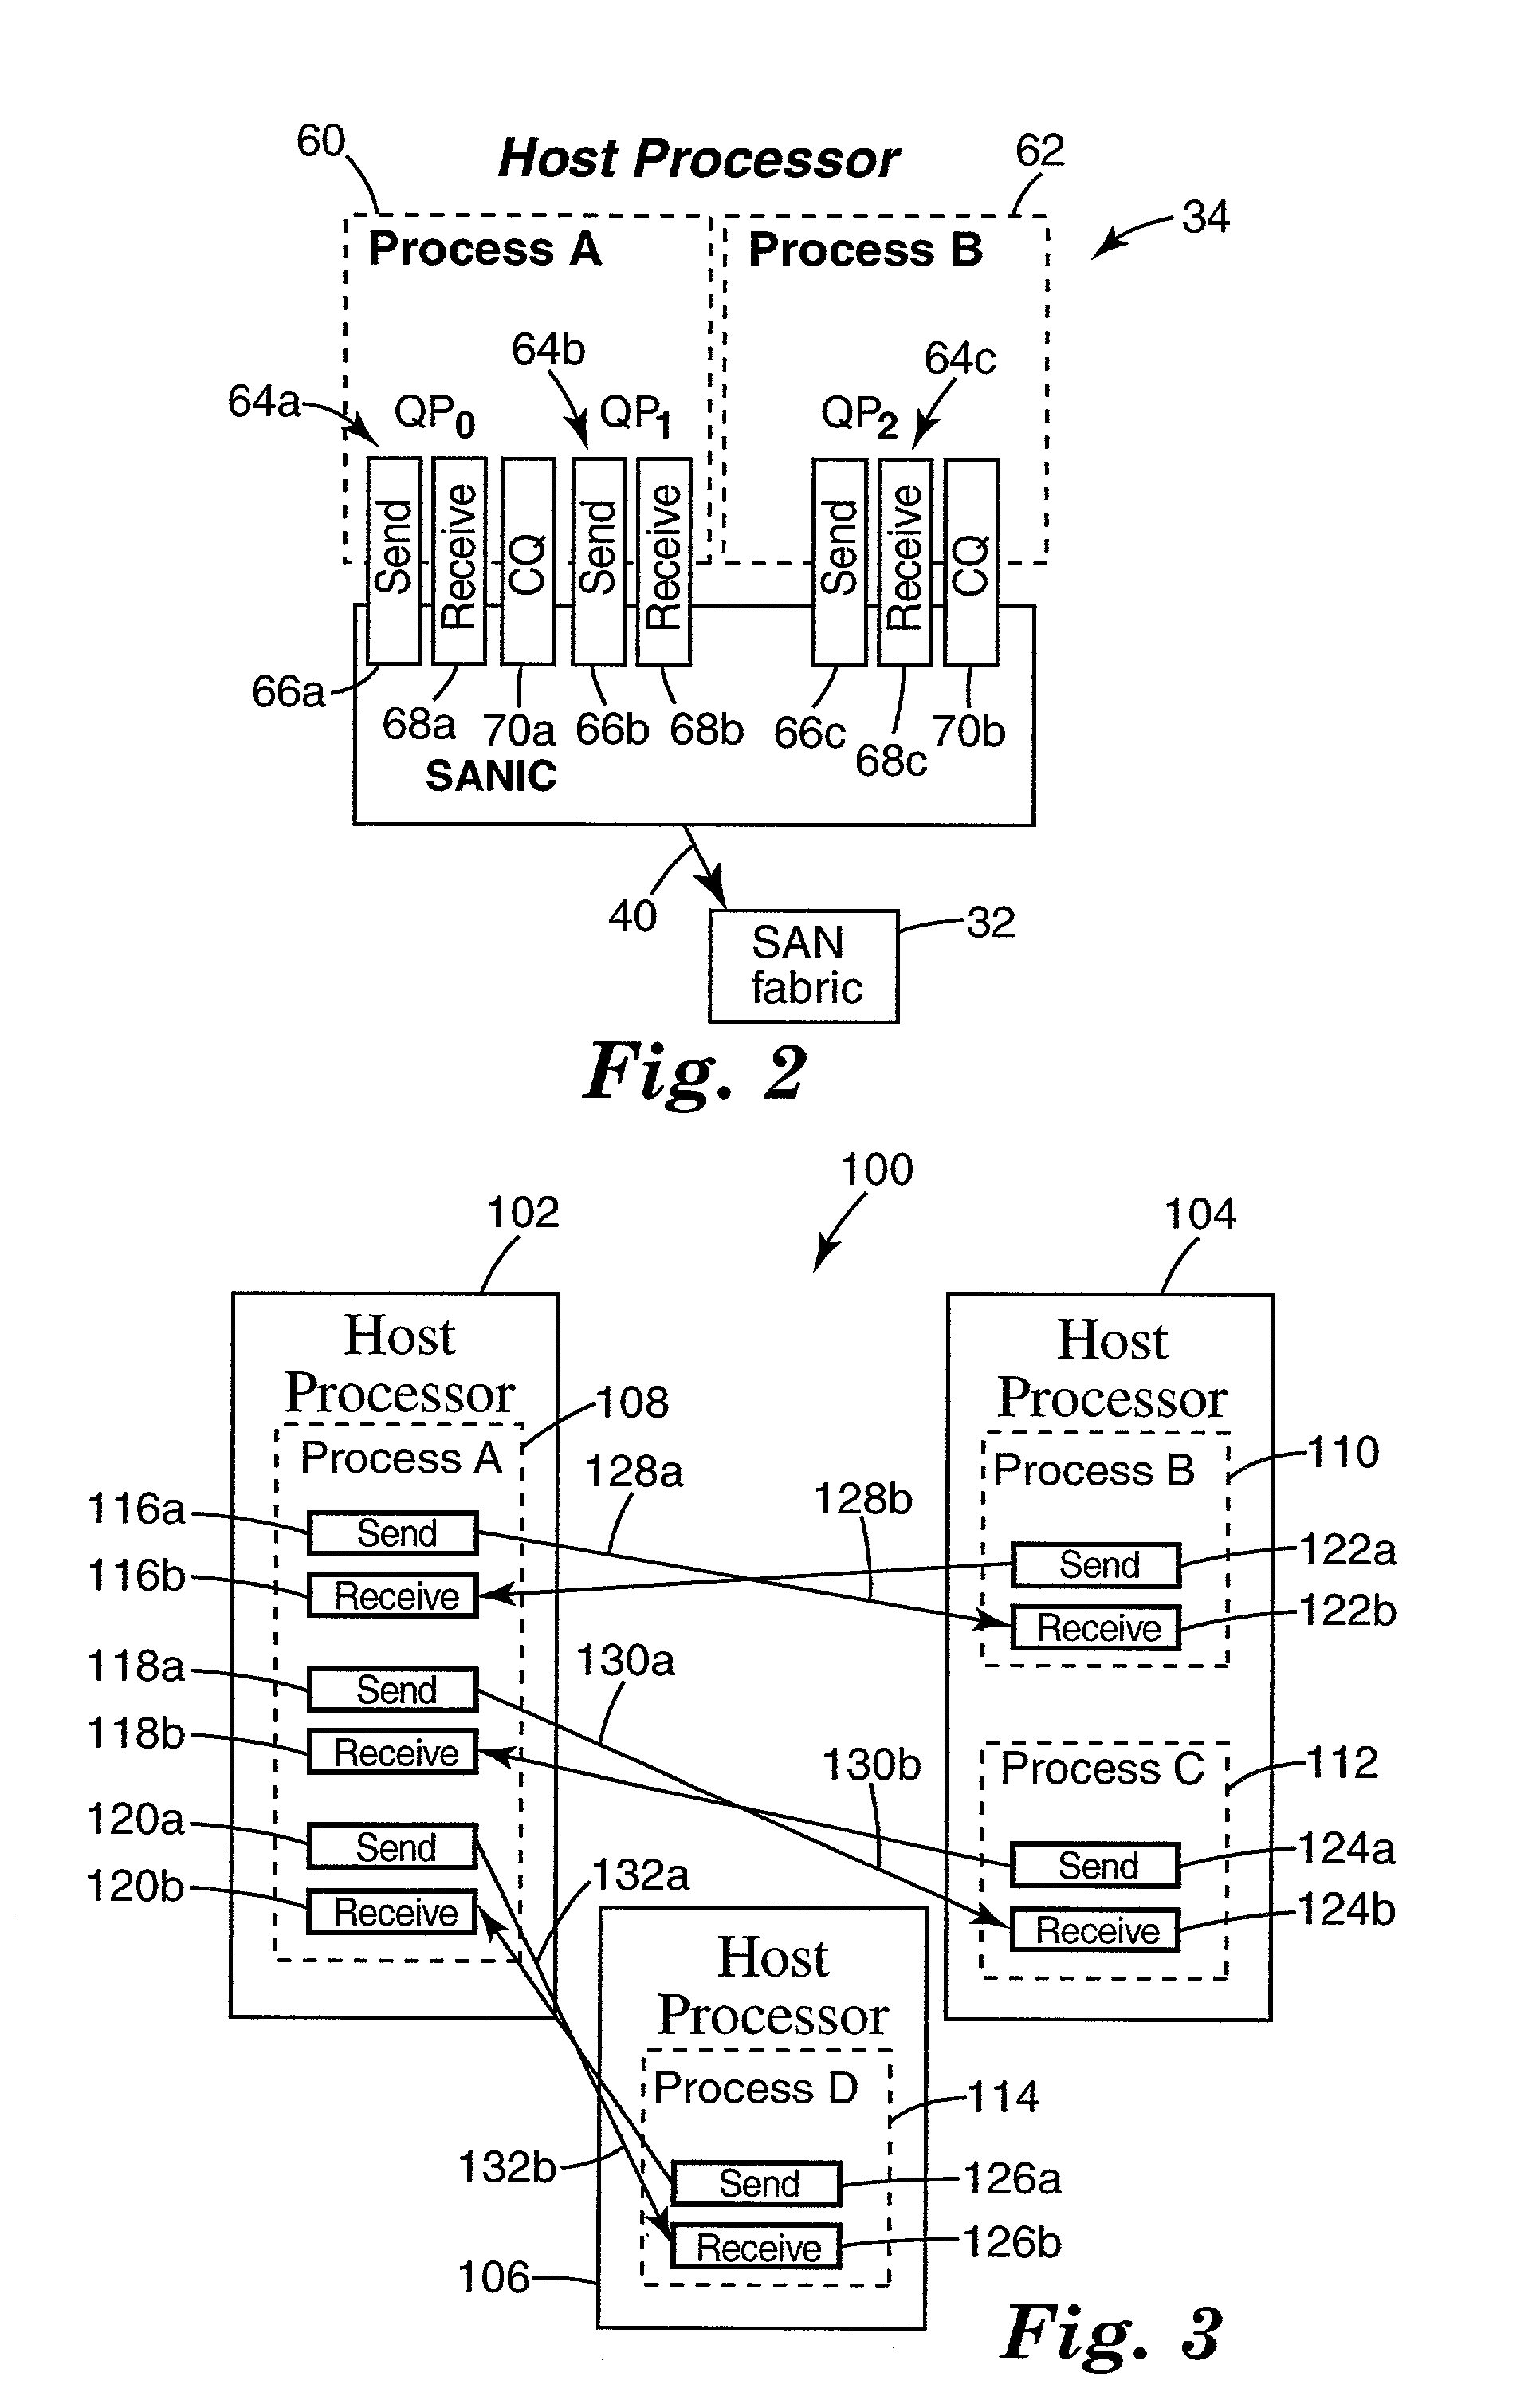 Congestion management in a distributed computer system multiplying current variable injection rate with a constant to set new variable injection rate at source node